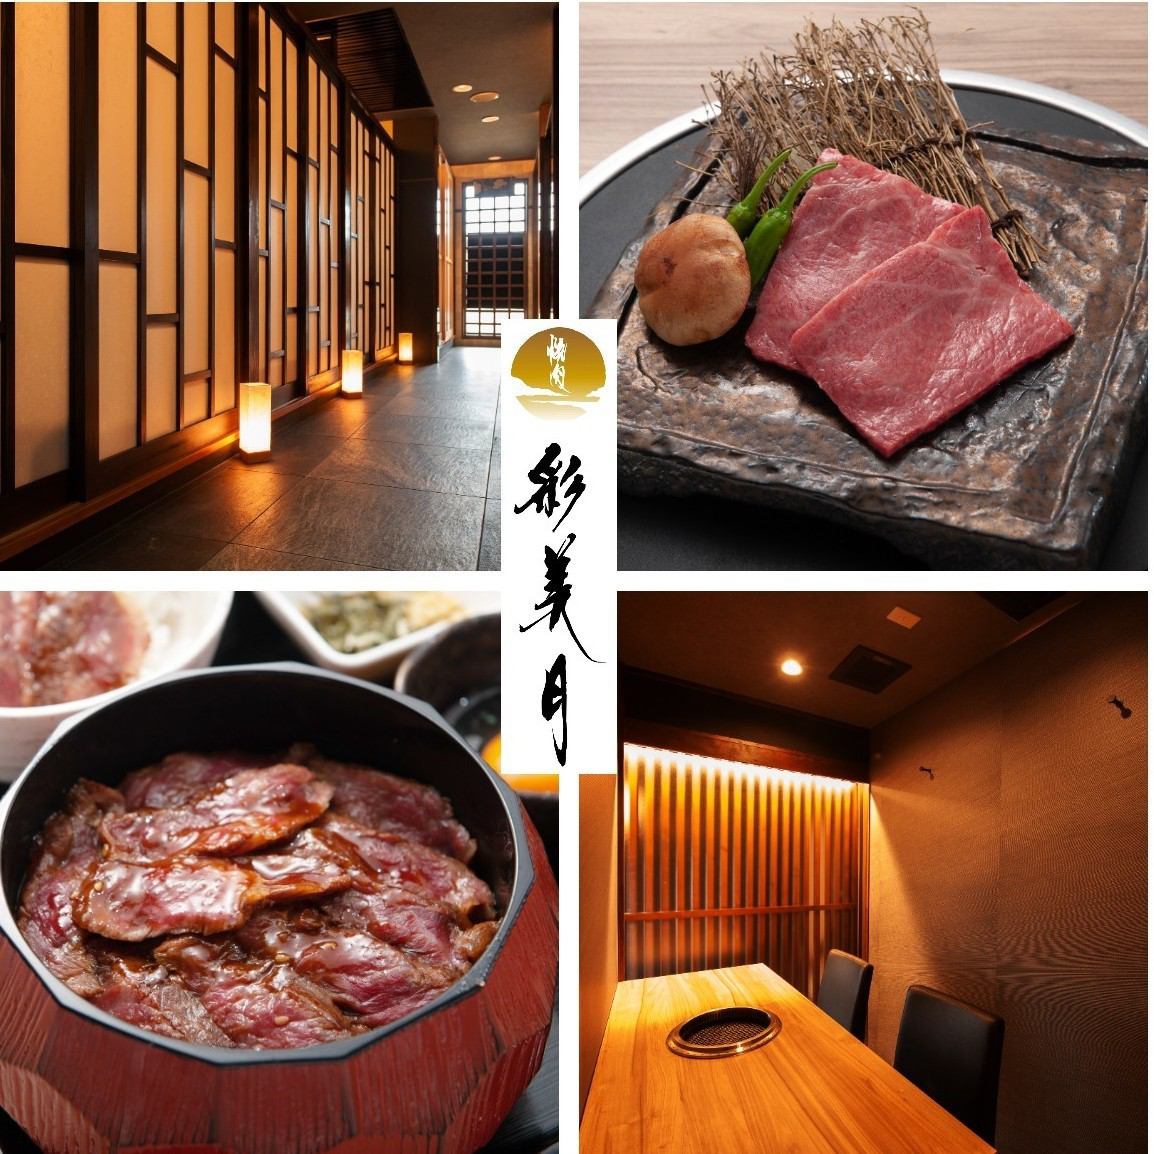 We are also particular about each private room, so you can enjoy carefully selected high-quality meat ☆